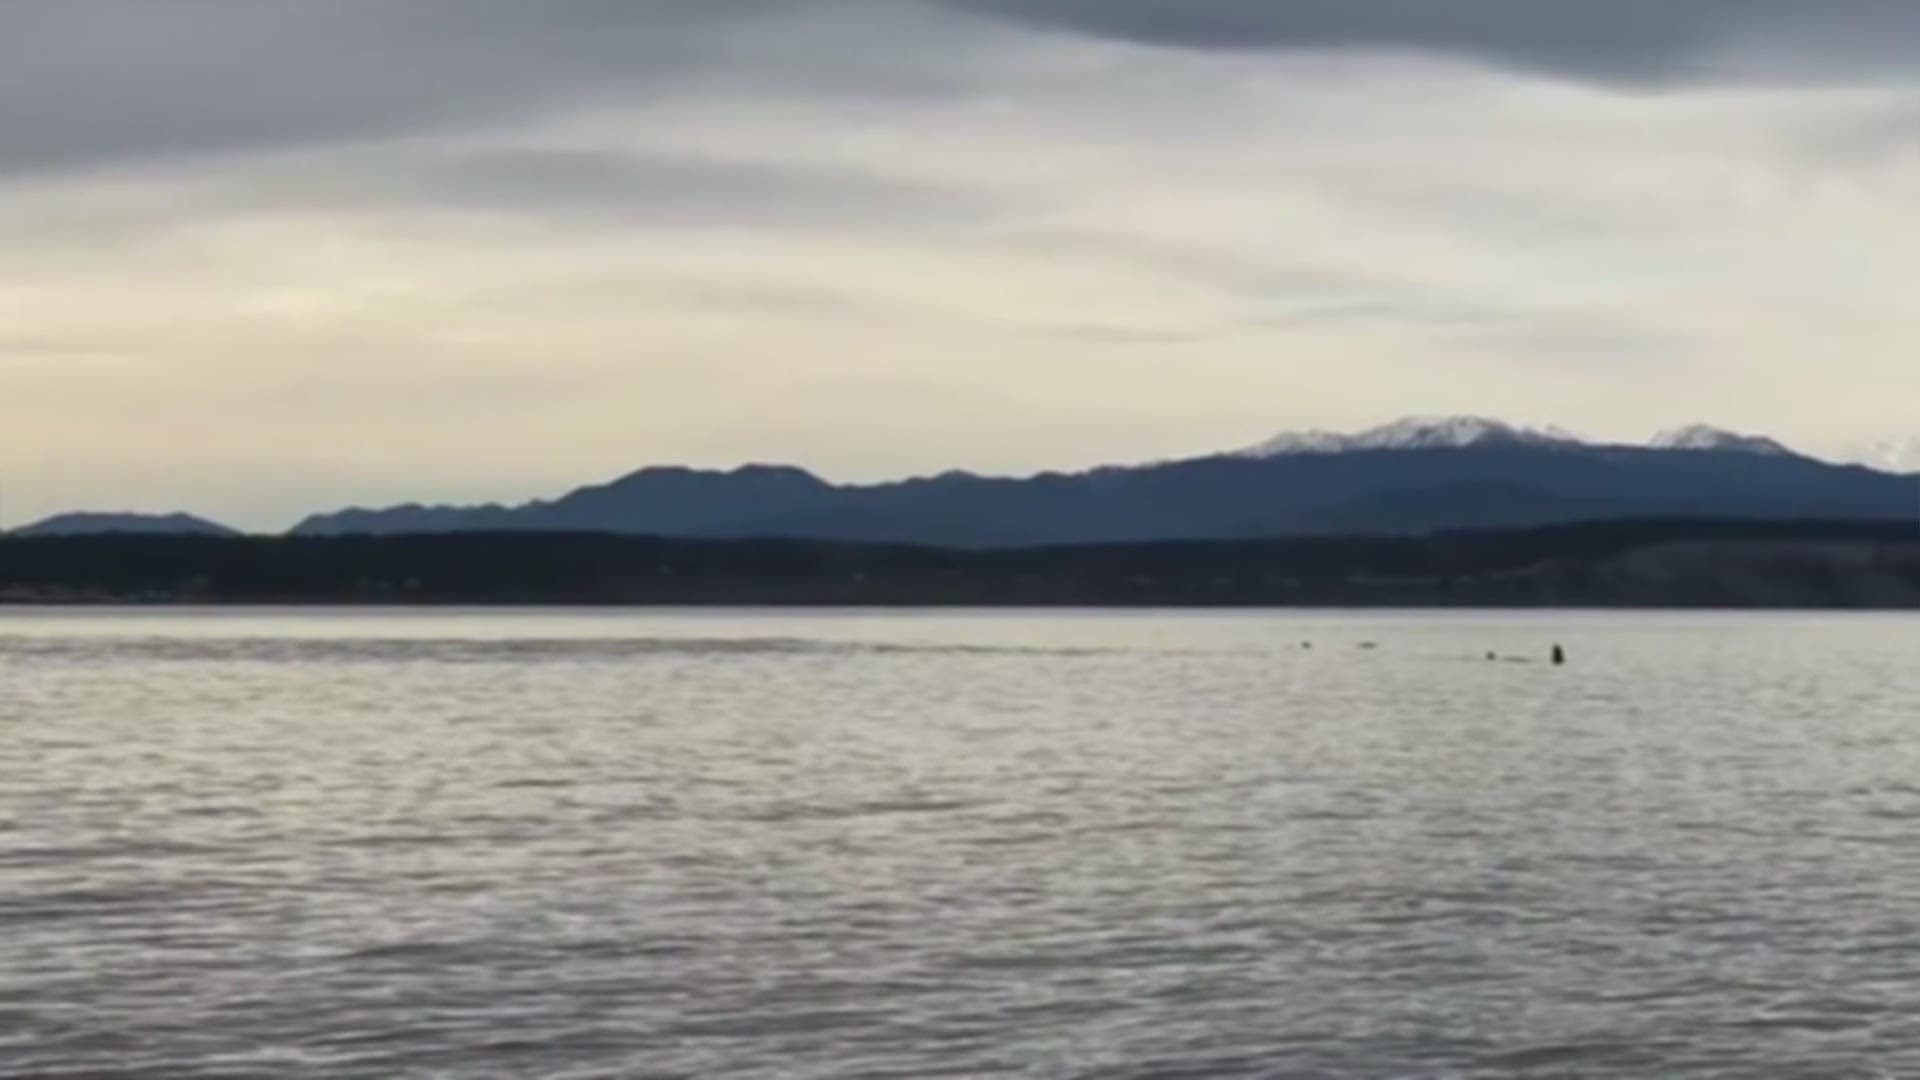 Video from Center for Whale Research shows a Southern Resident orca known as L124 or "Lucky" just a day or two after it was first spotted on Jan. 10.